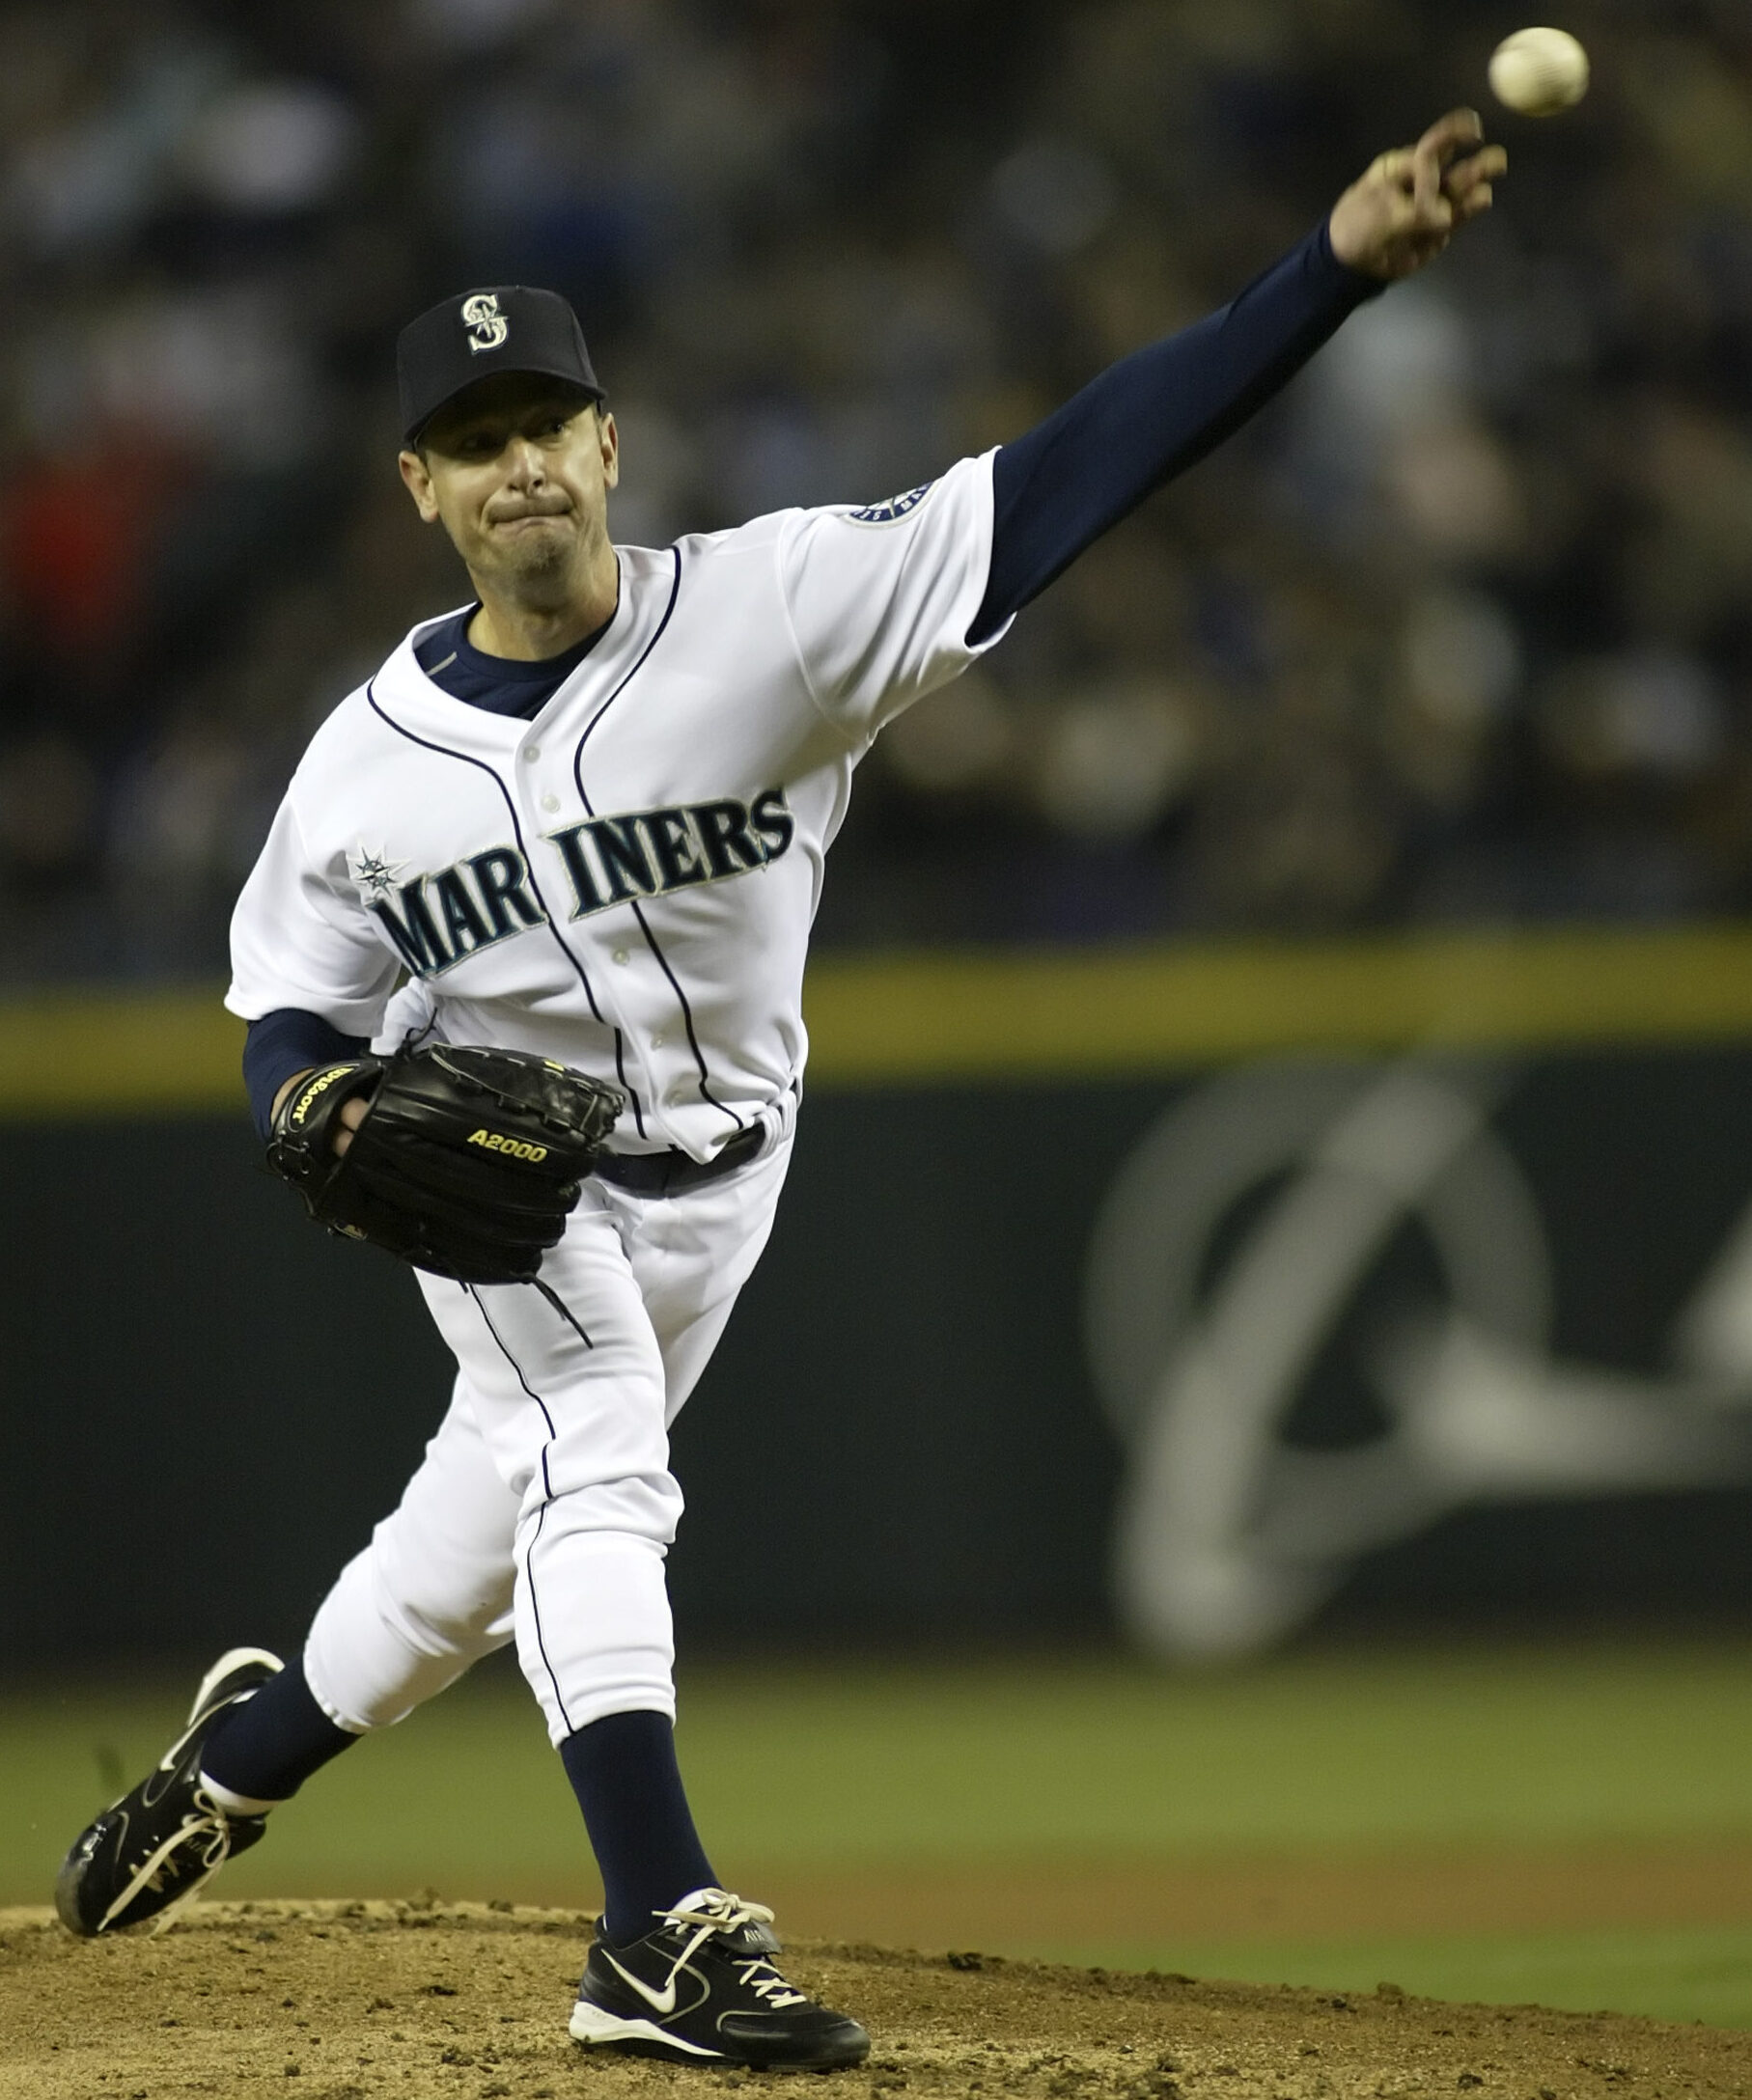 This Day In Sports: Moyer becomes oldest pitcher to win MLB start